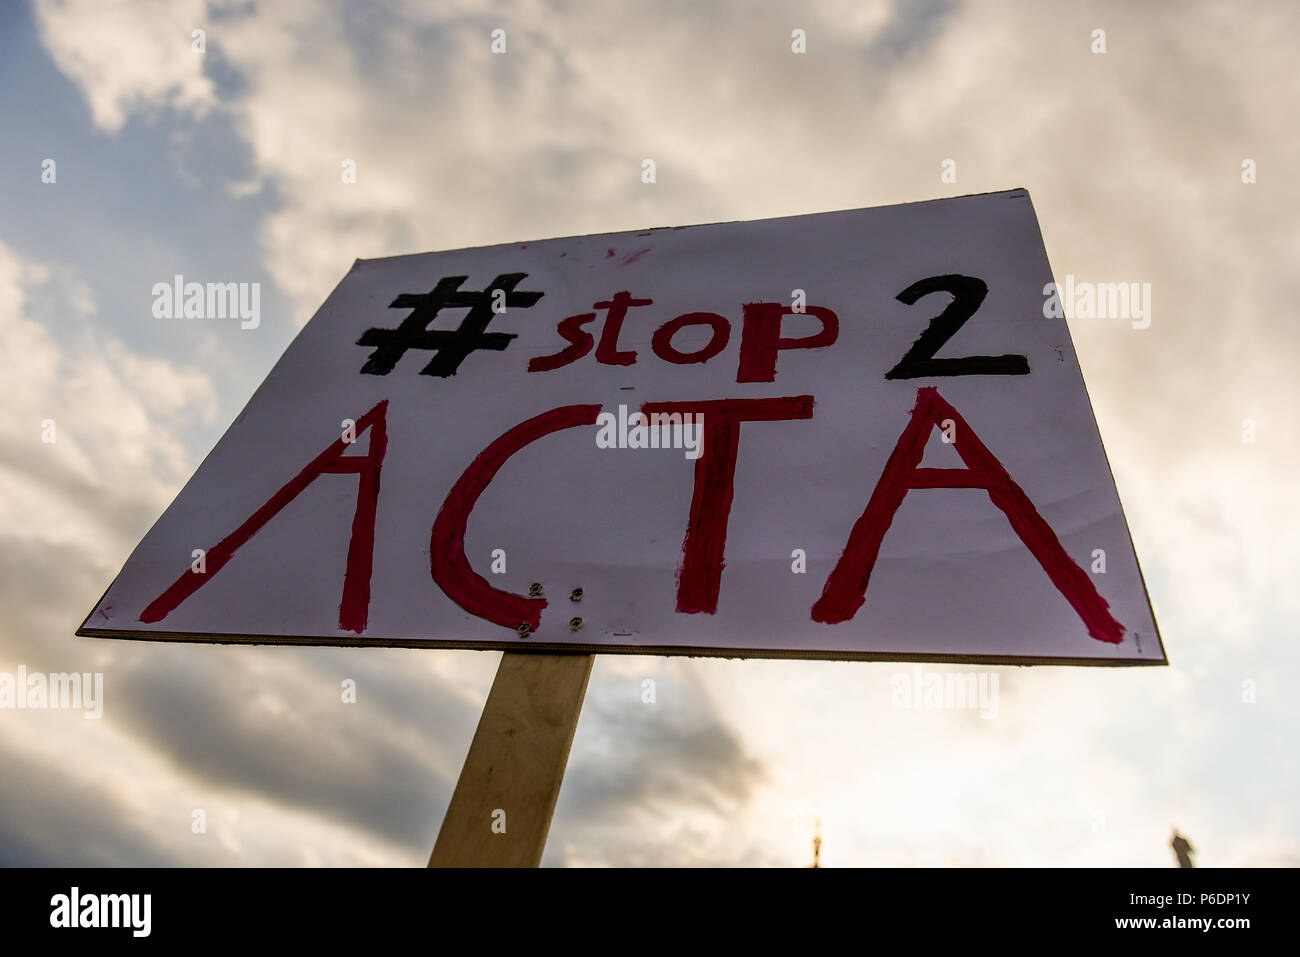 Krakow, Poland. 29th June, 2018. A banner saying ''#STOP ACTA 2 '' during a protest against the implementation of ACTA 2 ( Anti Counterfeiting Trade Agreement) in European Union. On June 20th, The Legal Affairs Committee of the European Parliament approved the draft directive on copyright on the digital market. The next vote will take place on July 4th. The European Commission intends to introduce a new tool, allegedly to protect copyrights. However, the treaty has a much broader scope and will deal with tools targeting internet distribution and information technology. (Credit Image: © Omar Stock Photo